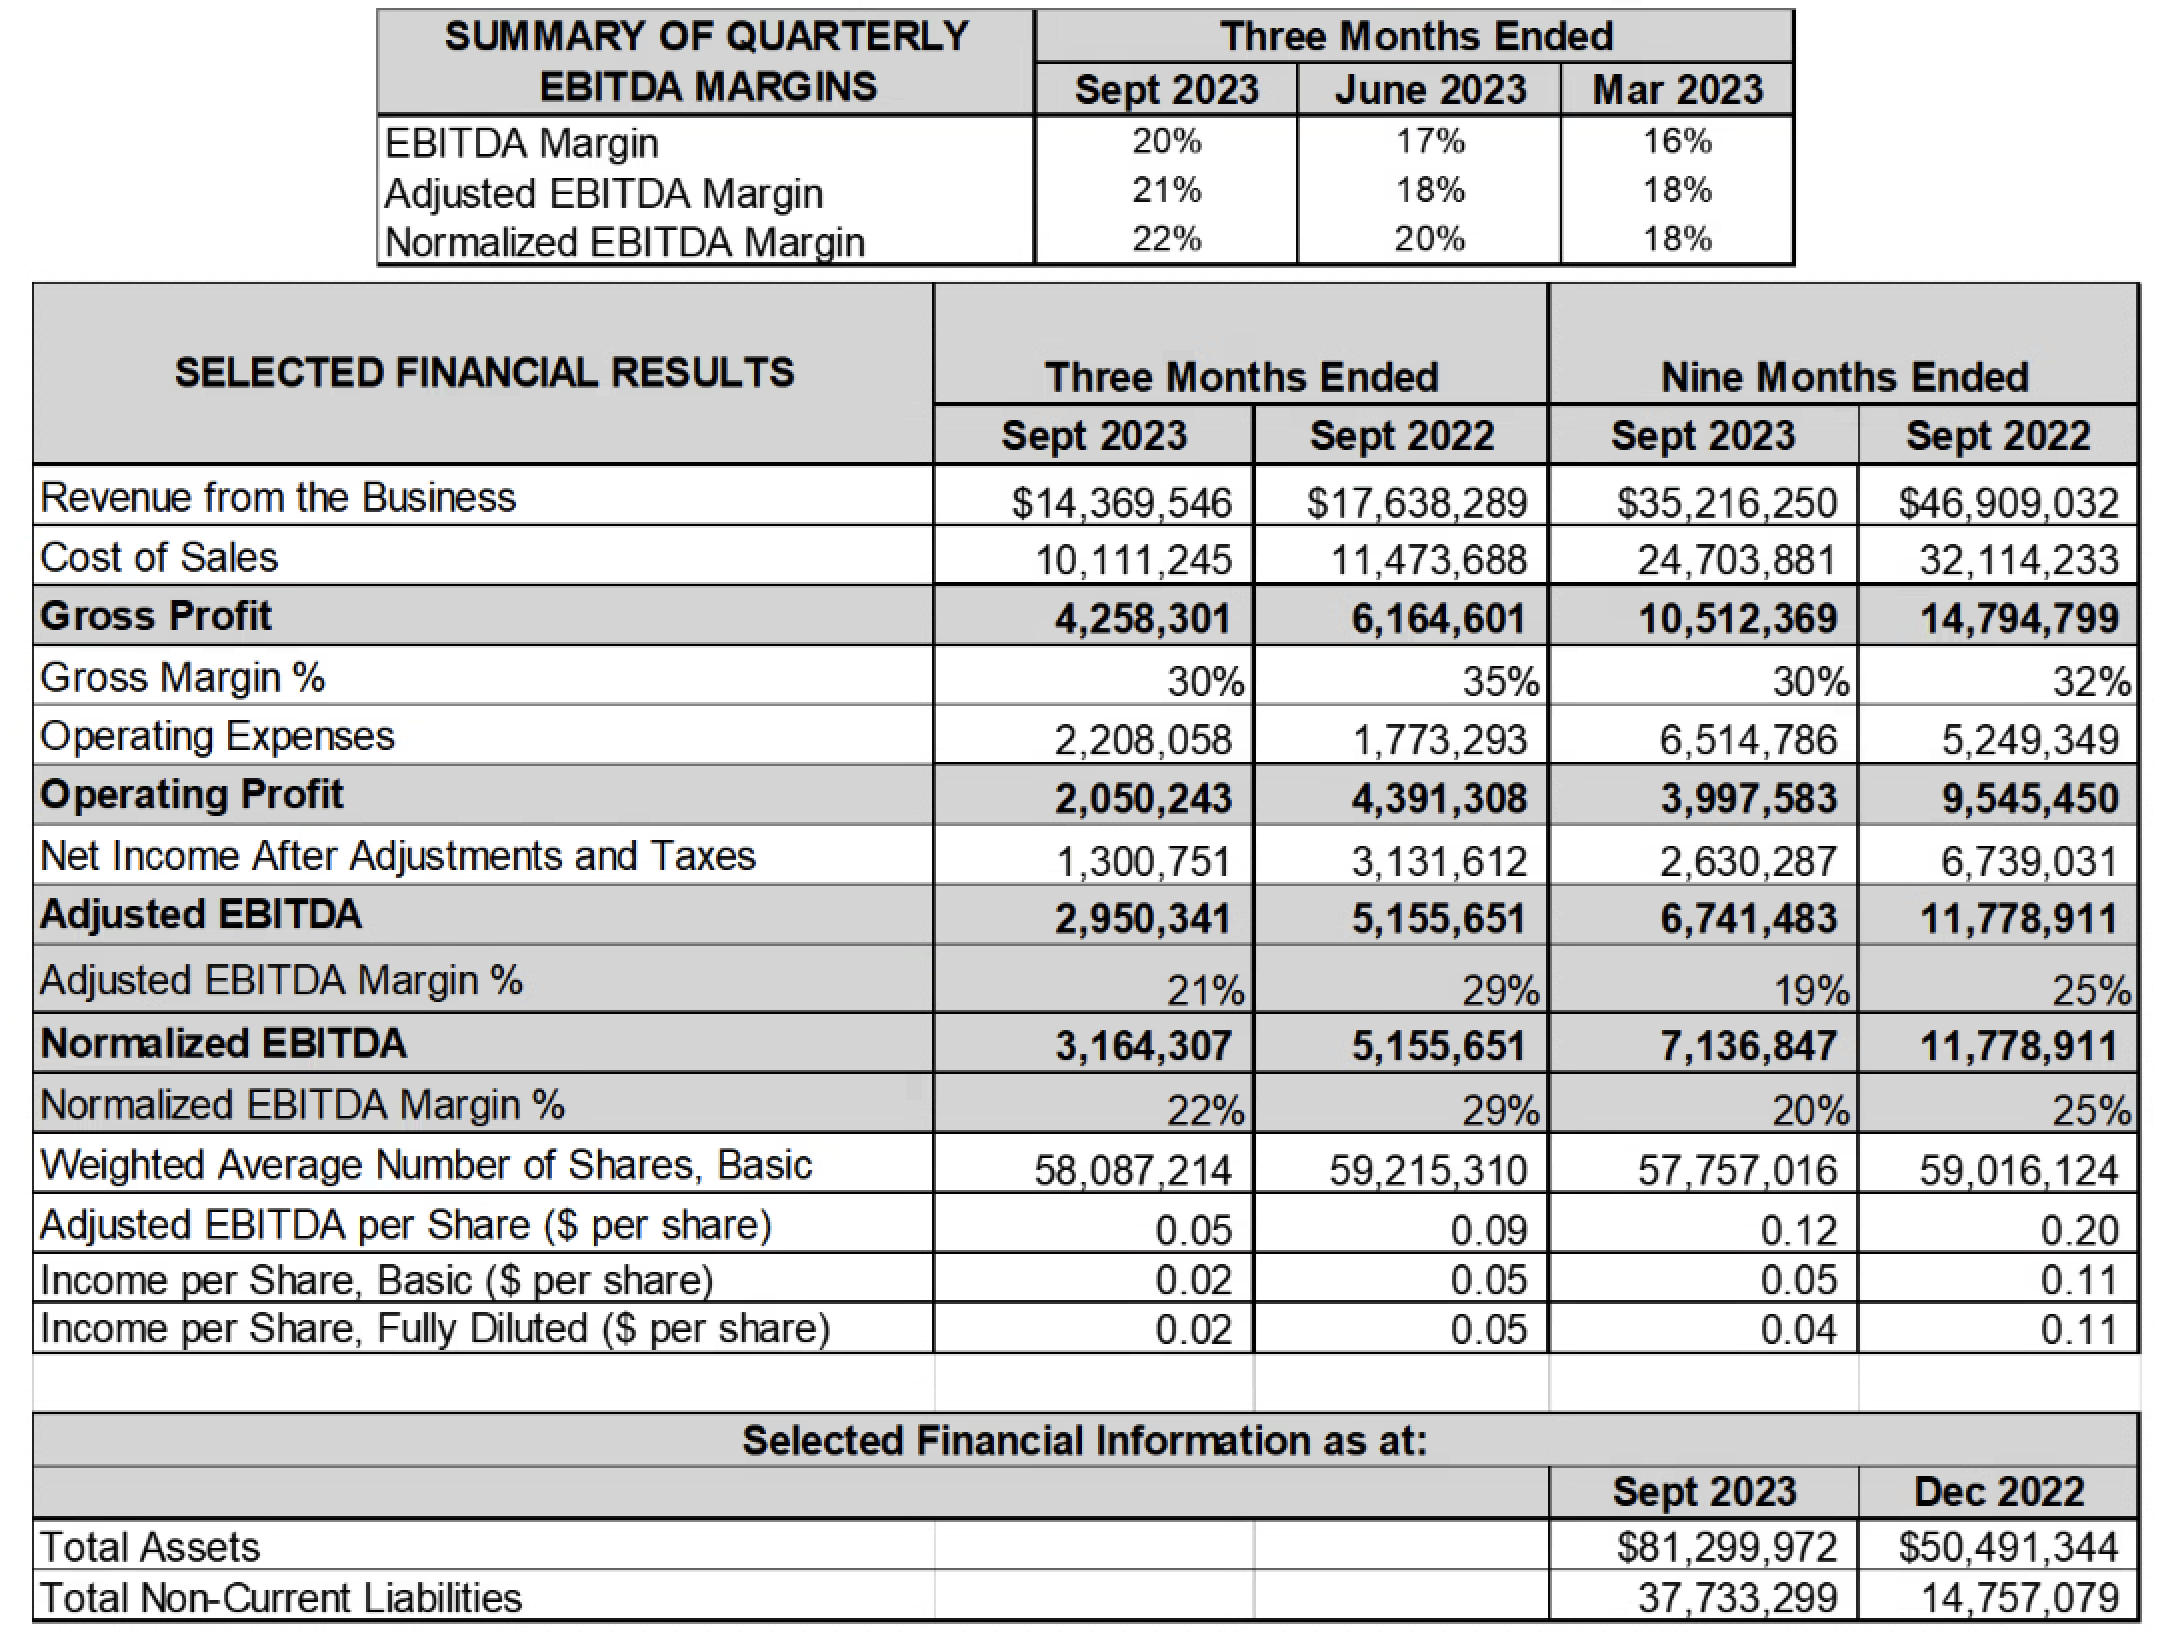 Summary of Quarterly EBITDA Margins & Selected Financial Results